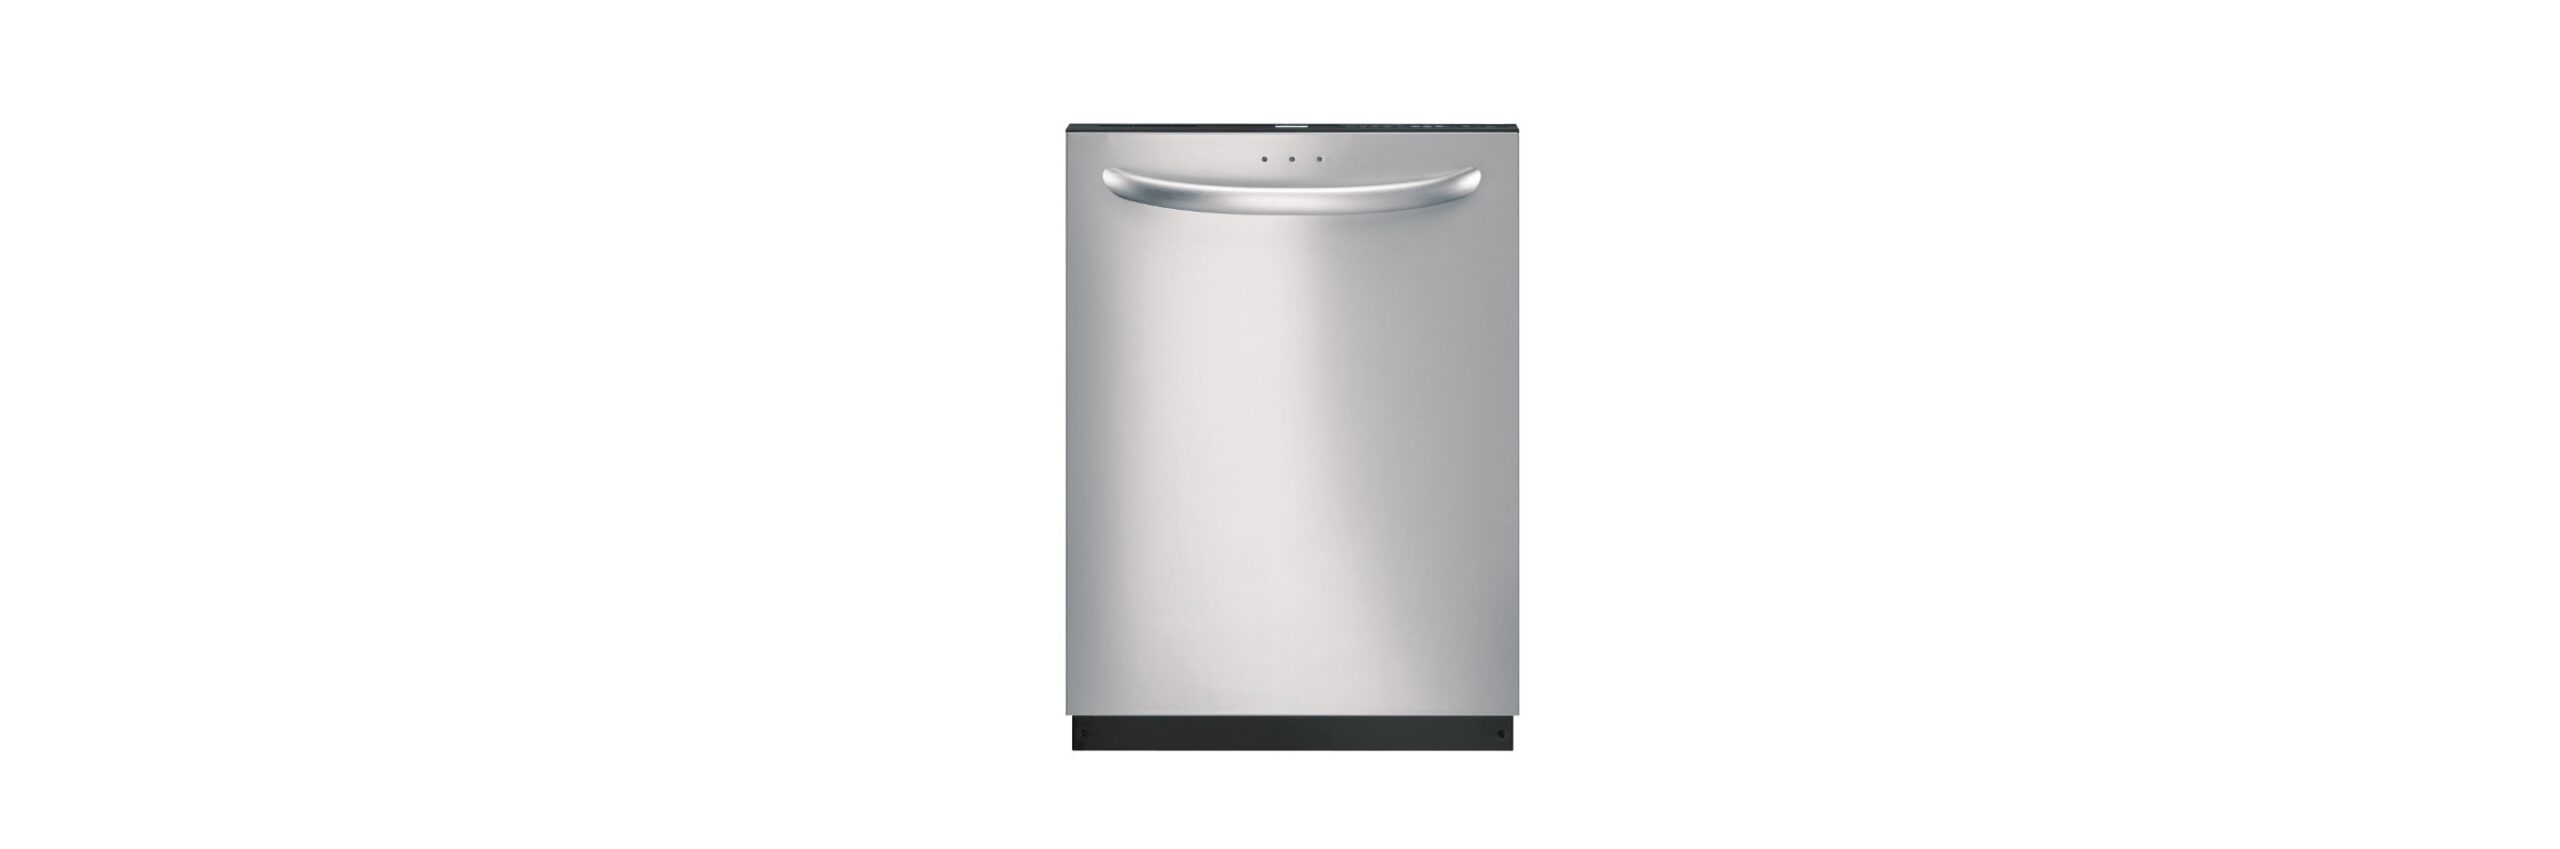 Kenmore ULTRA WASH 665.16839 Dishwasher Featured